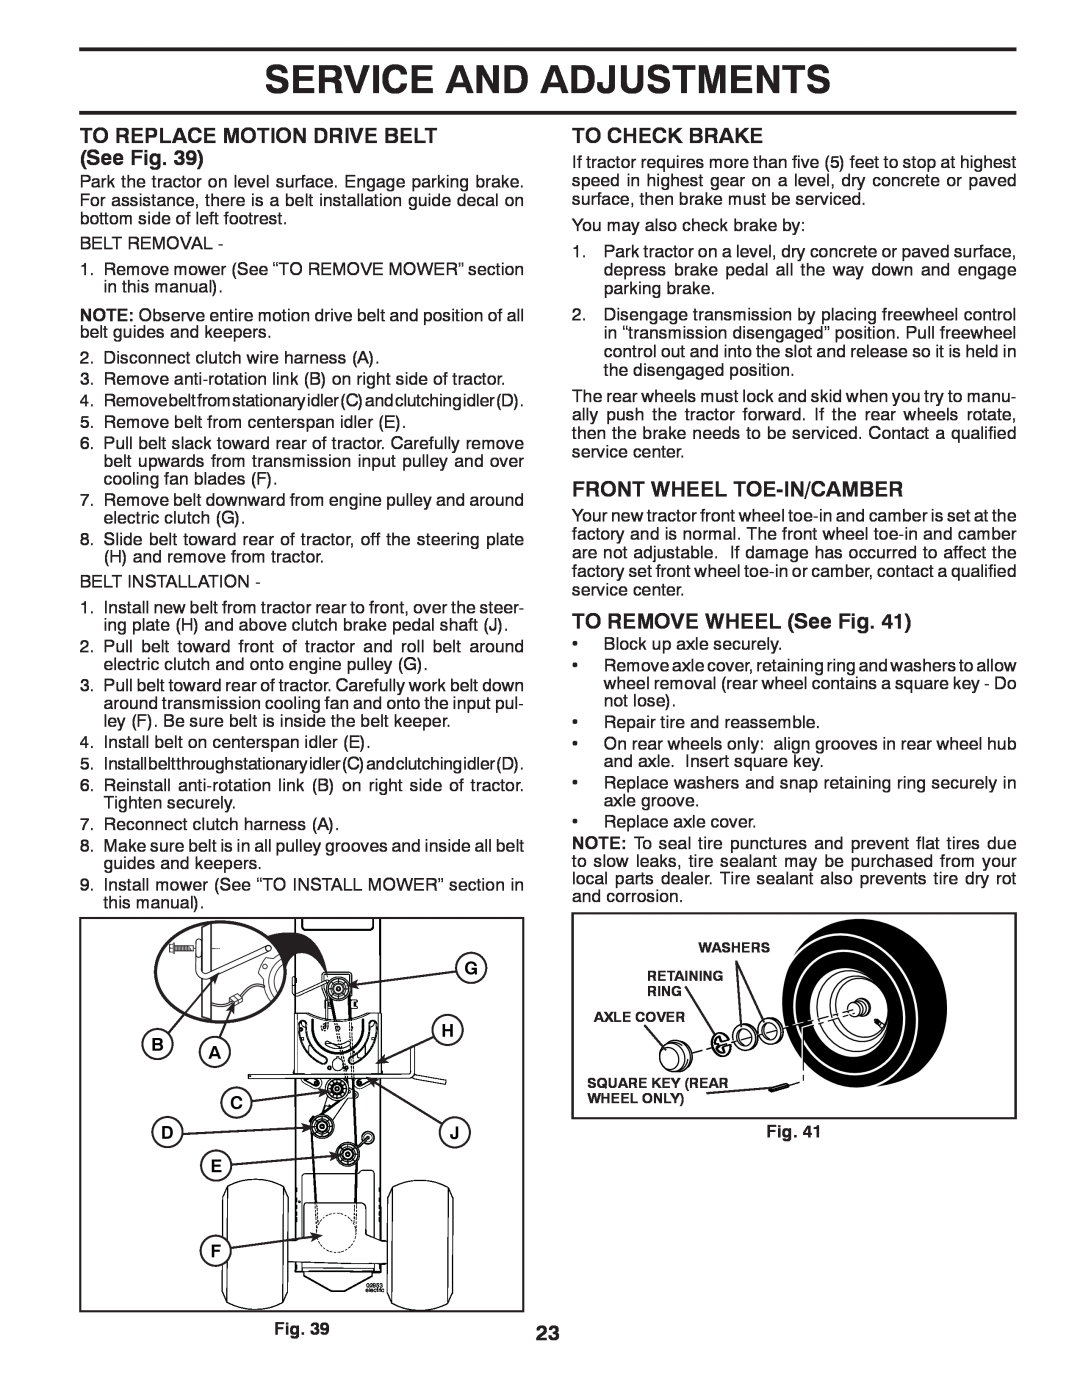 Poulan 433432 TO REPLACE MOTION DRIVE BELT See Fig, To Check Brake, Front Wheel Toe-In/Camber, TO REMOVE WHEEL See Fig 